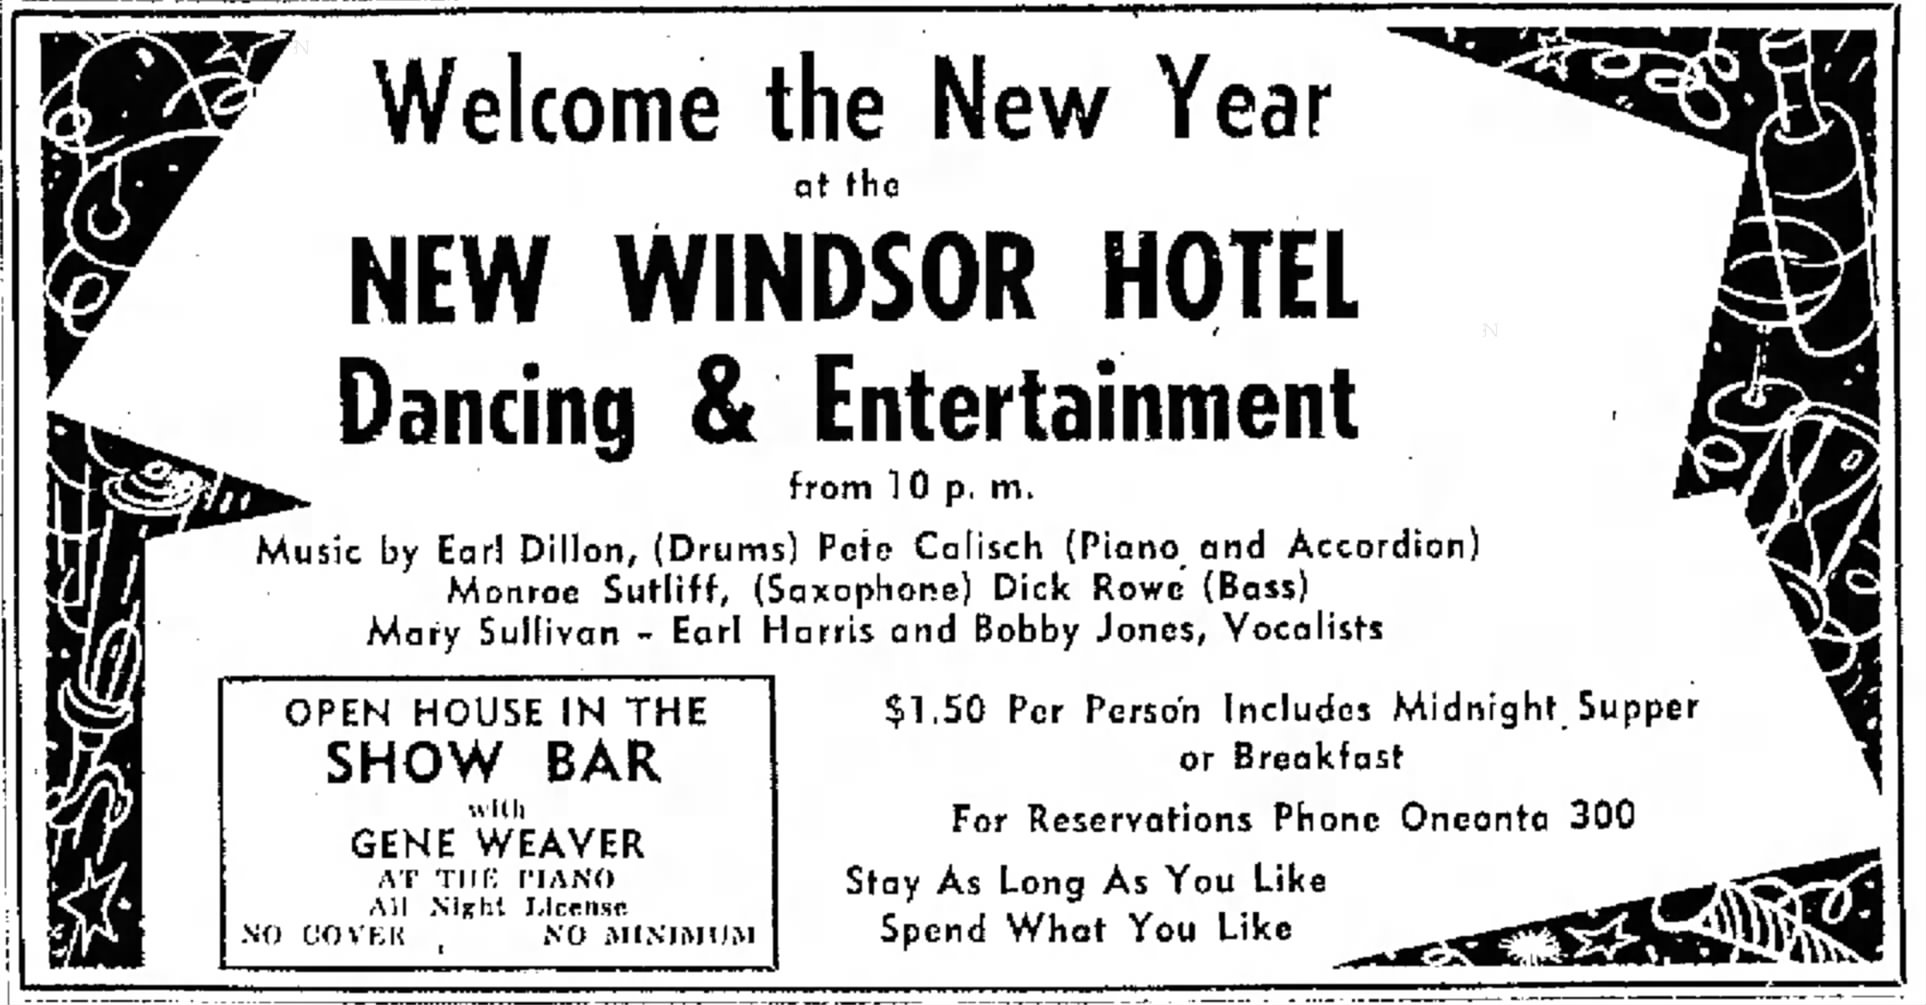 New Year's Eve at the New Windsor Hotel 1953